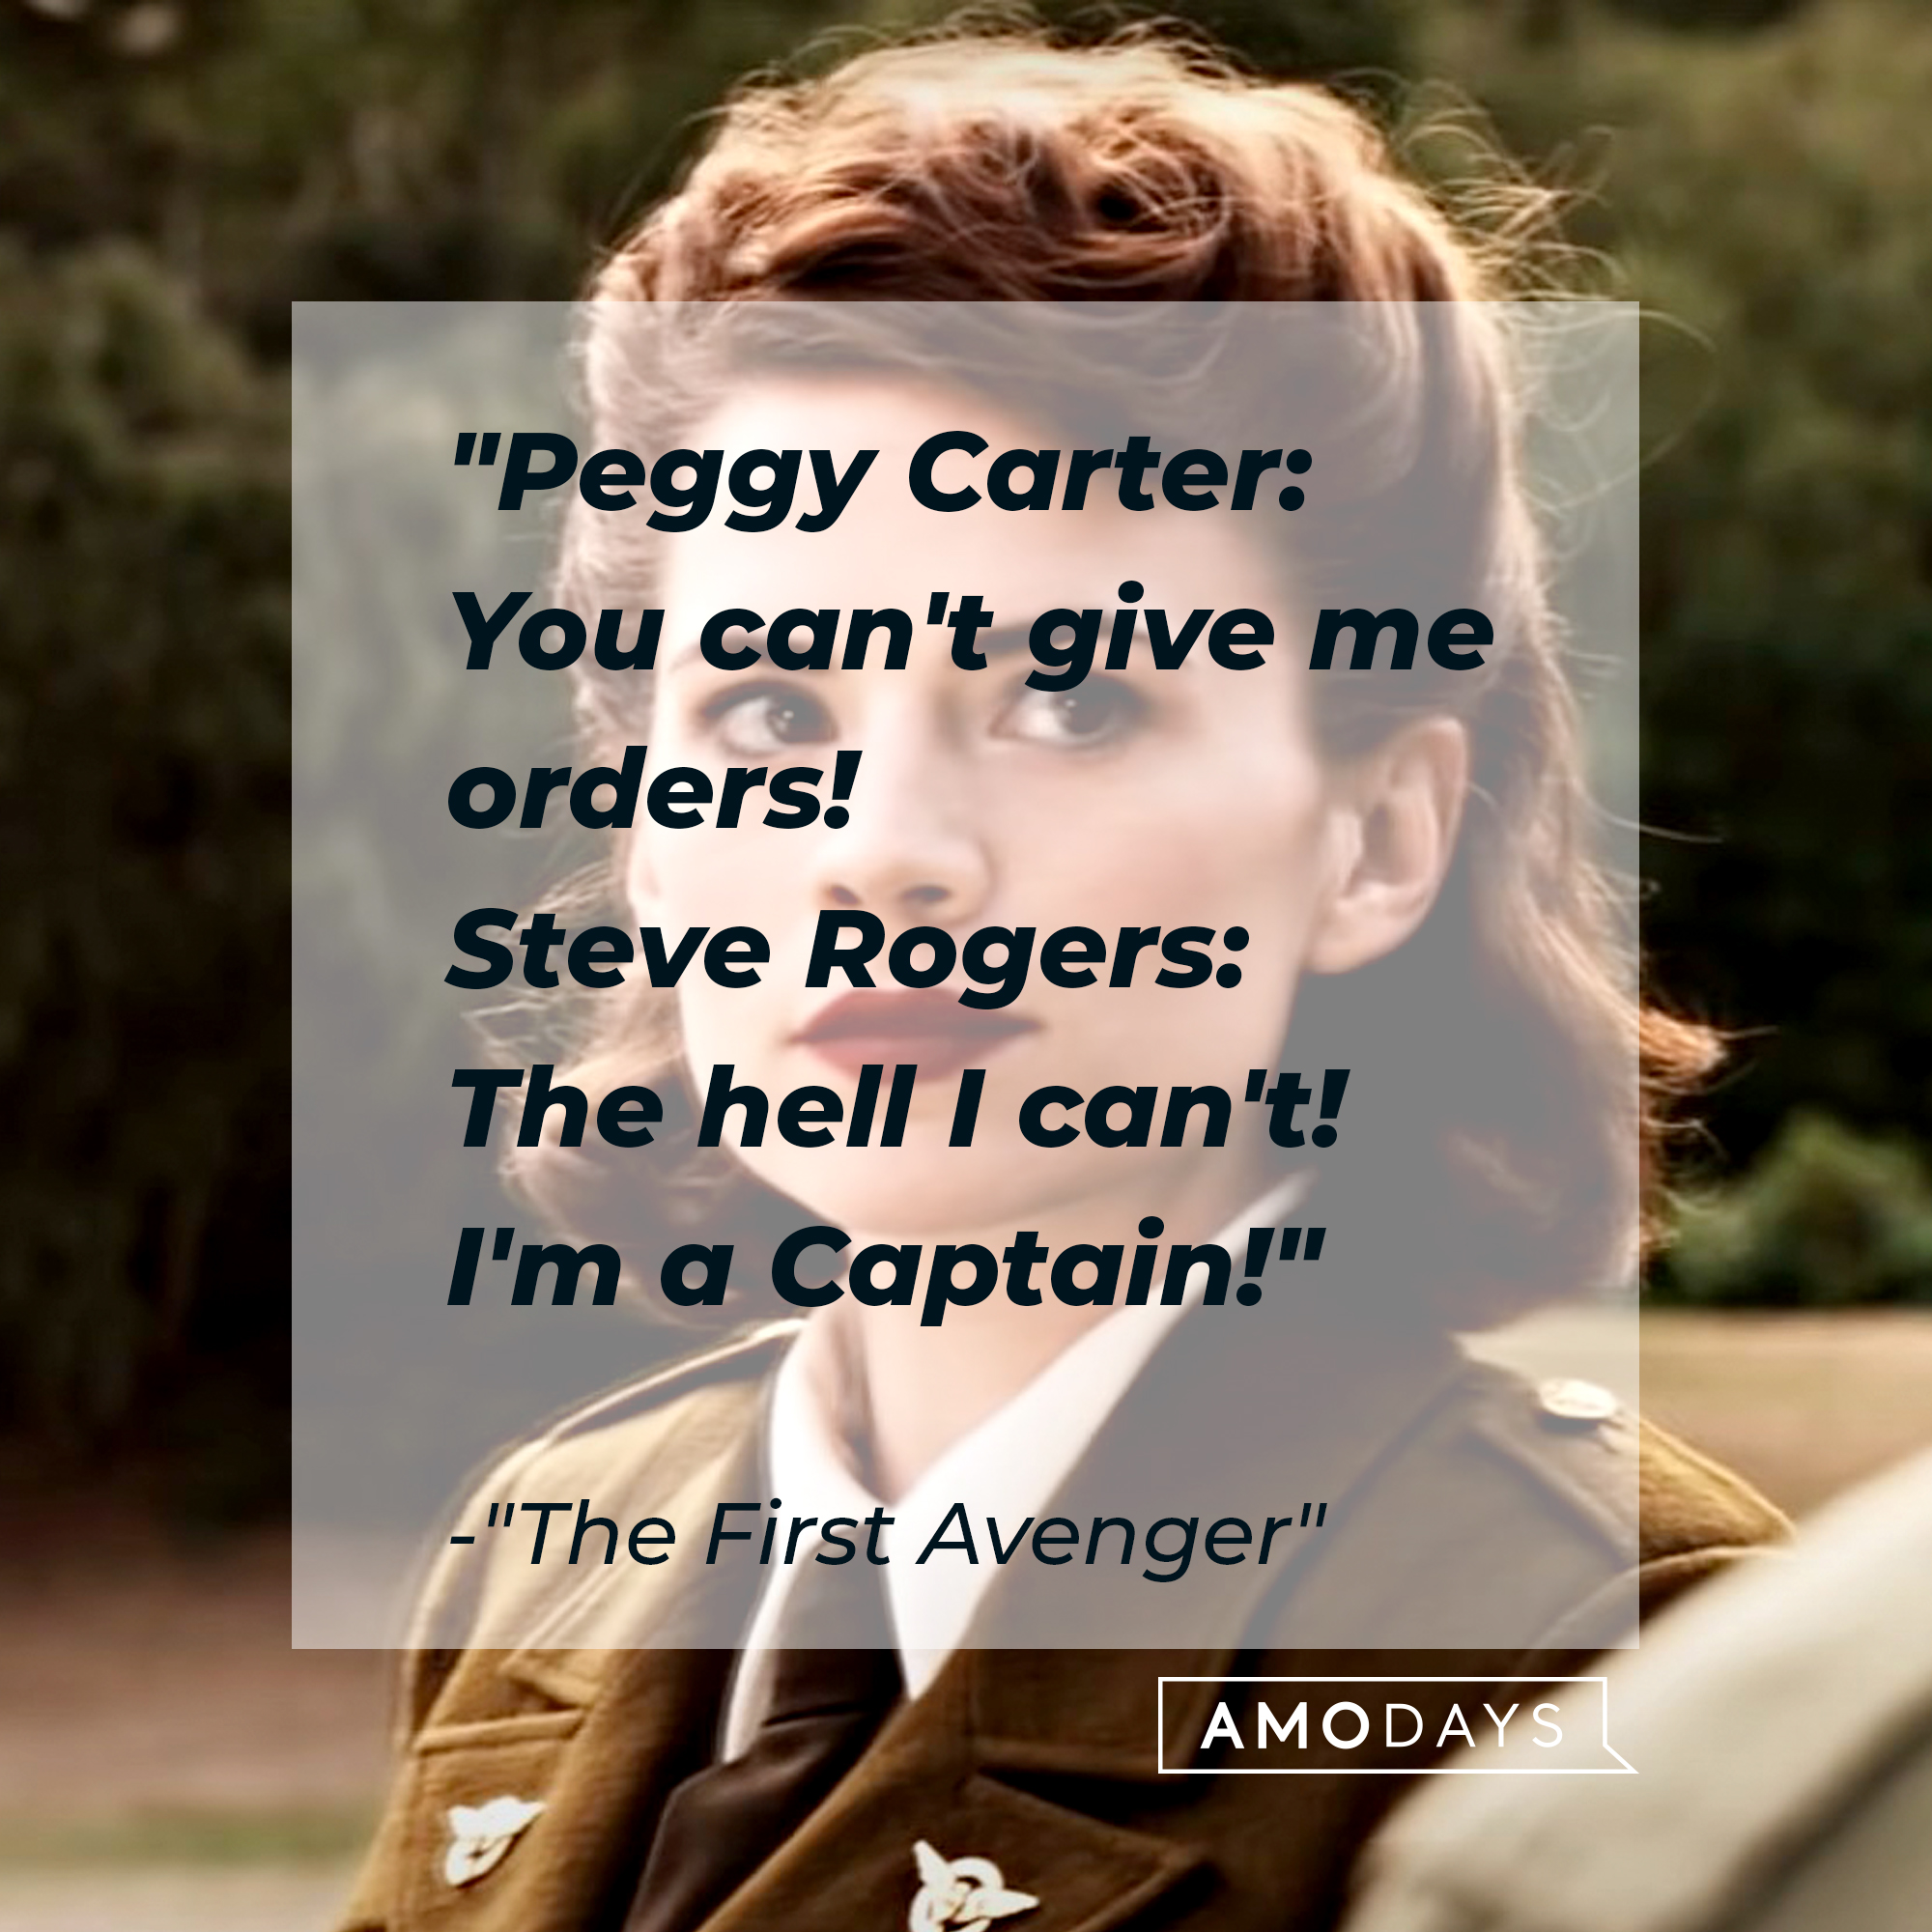 Quote from "The First Avenger": "Peggy Carter: You can't give me orders! / Steve Rogers: The hell I can't! I'm a Captain!" | Source: Facebook.com/marvelstudios